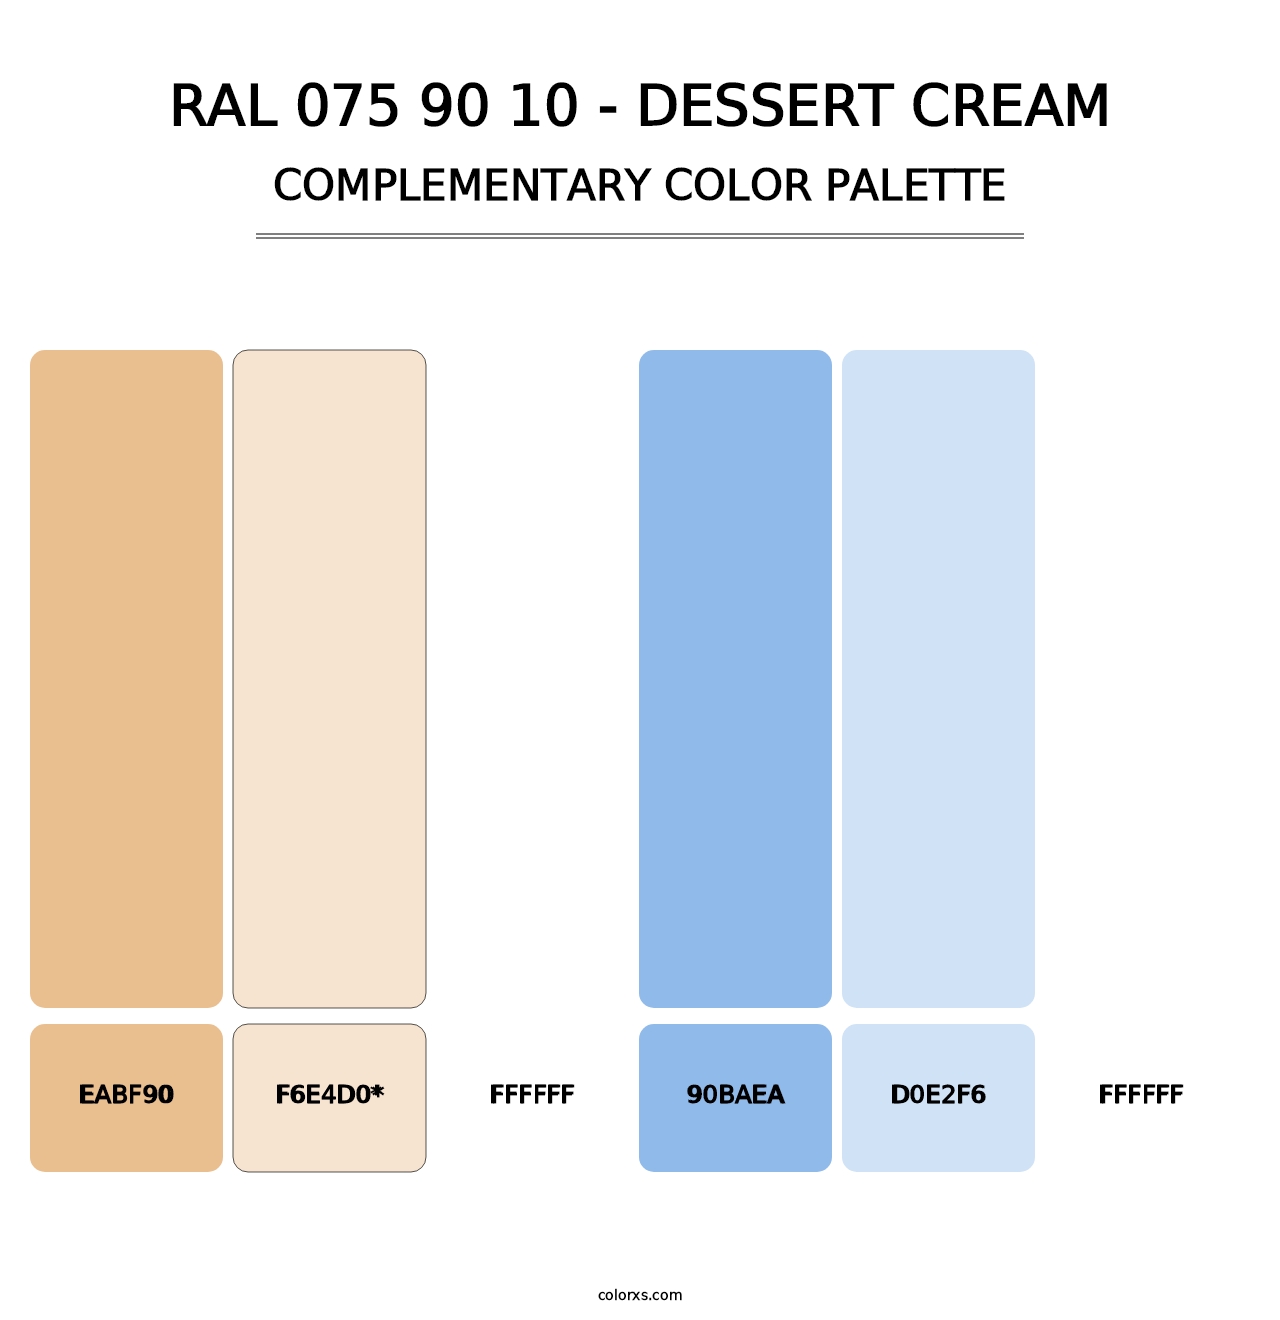 RAL 075 90 10 - Dessert Cream - Complementary Color Palette